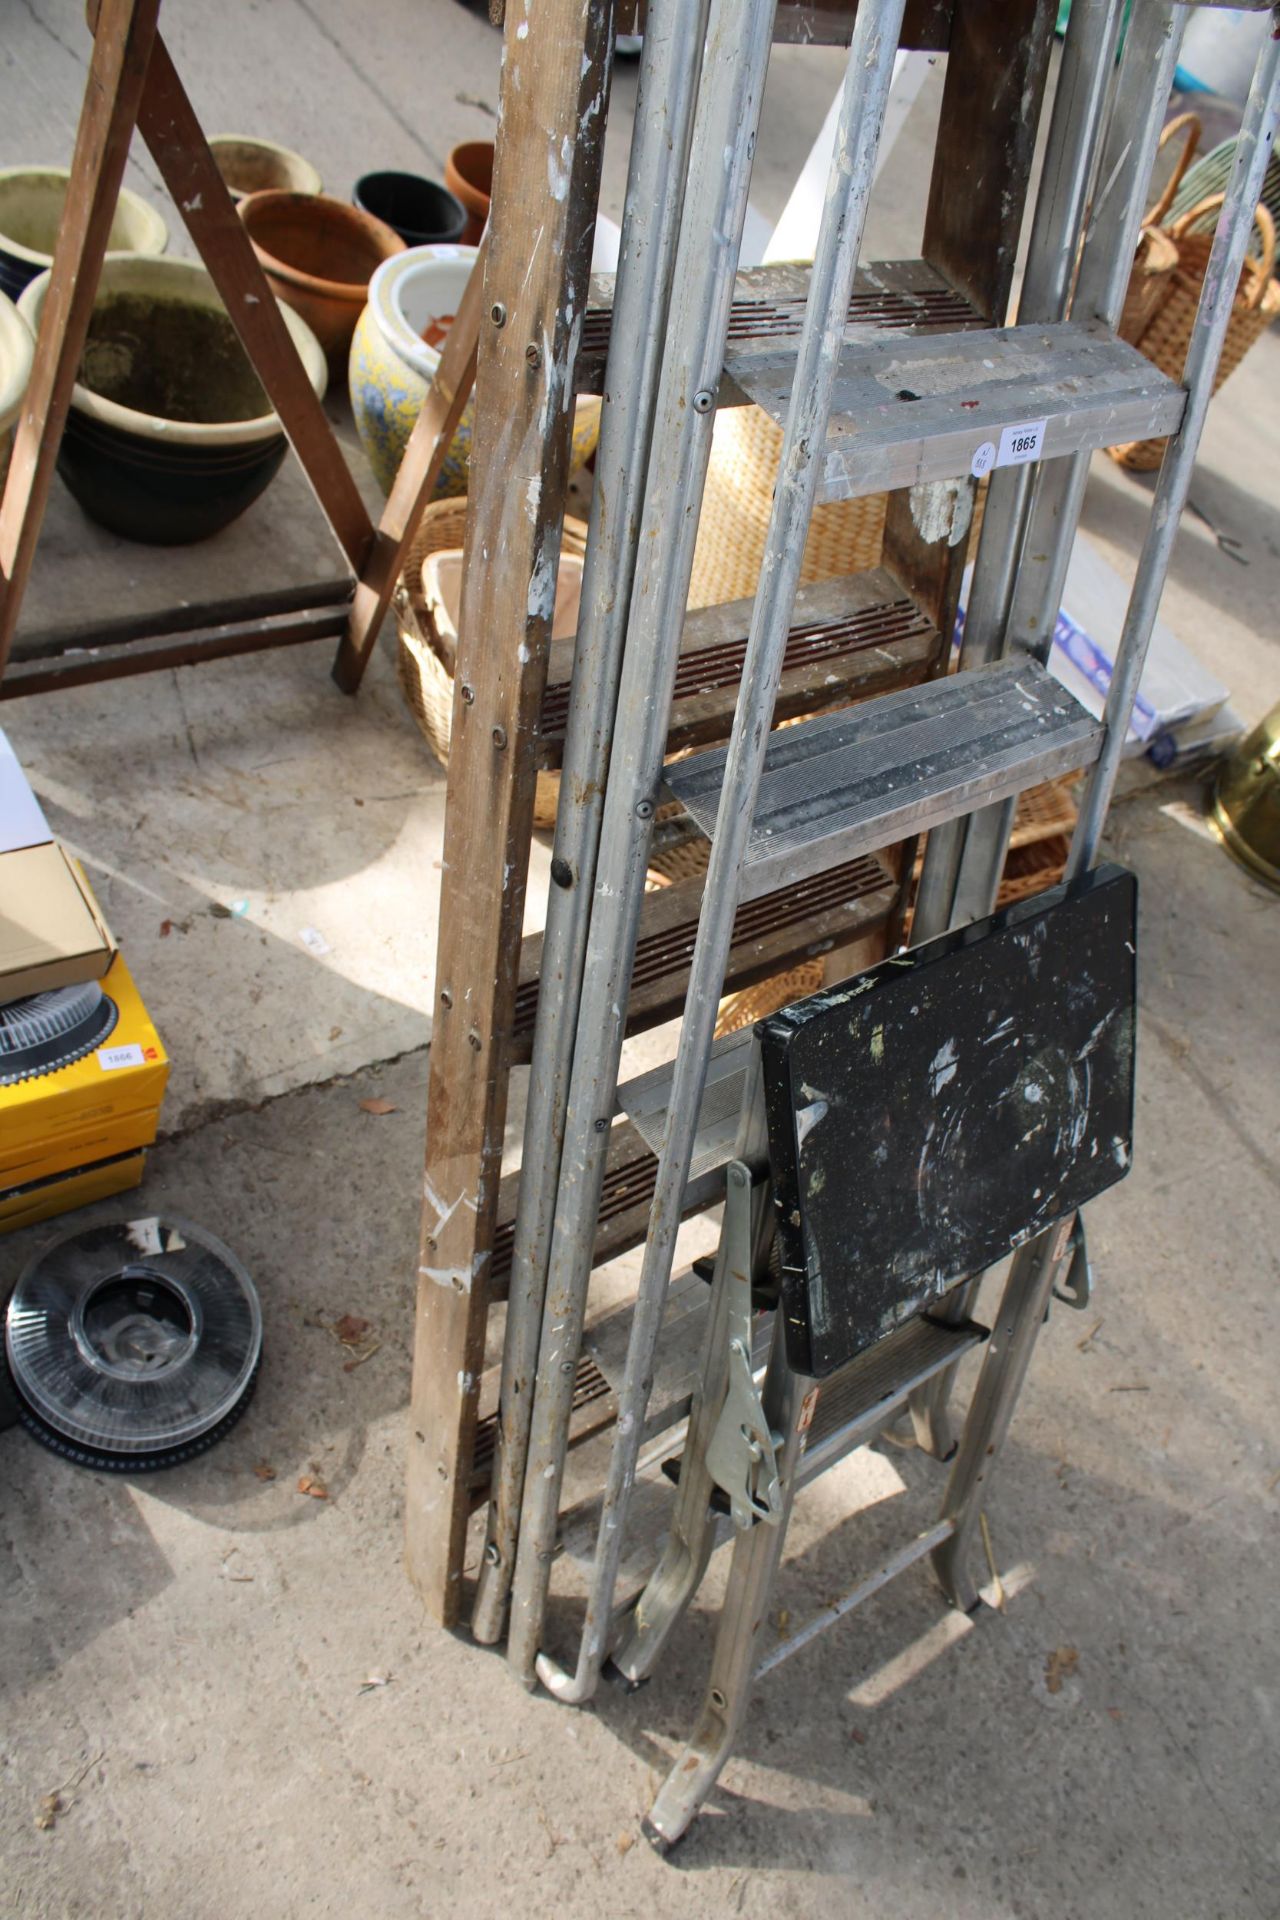 A VINTAGE WOODEN FIVE RUNG STEP LADDER, A FIVE RUNG ALUMINIUM STEP LADDER AND A FOLDING STEP STOOL - Image 2 of 2